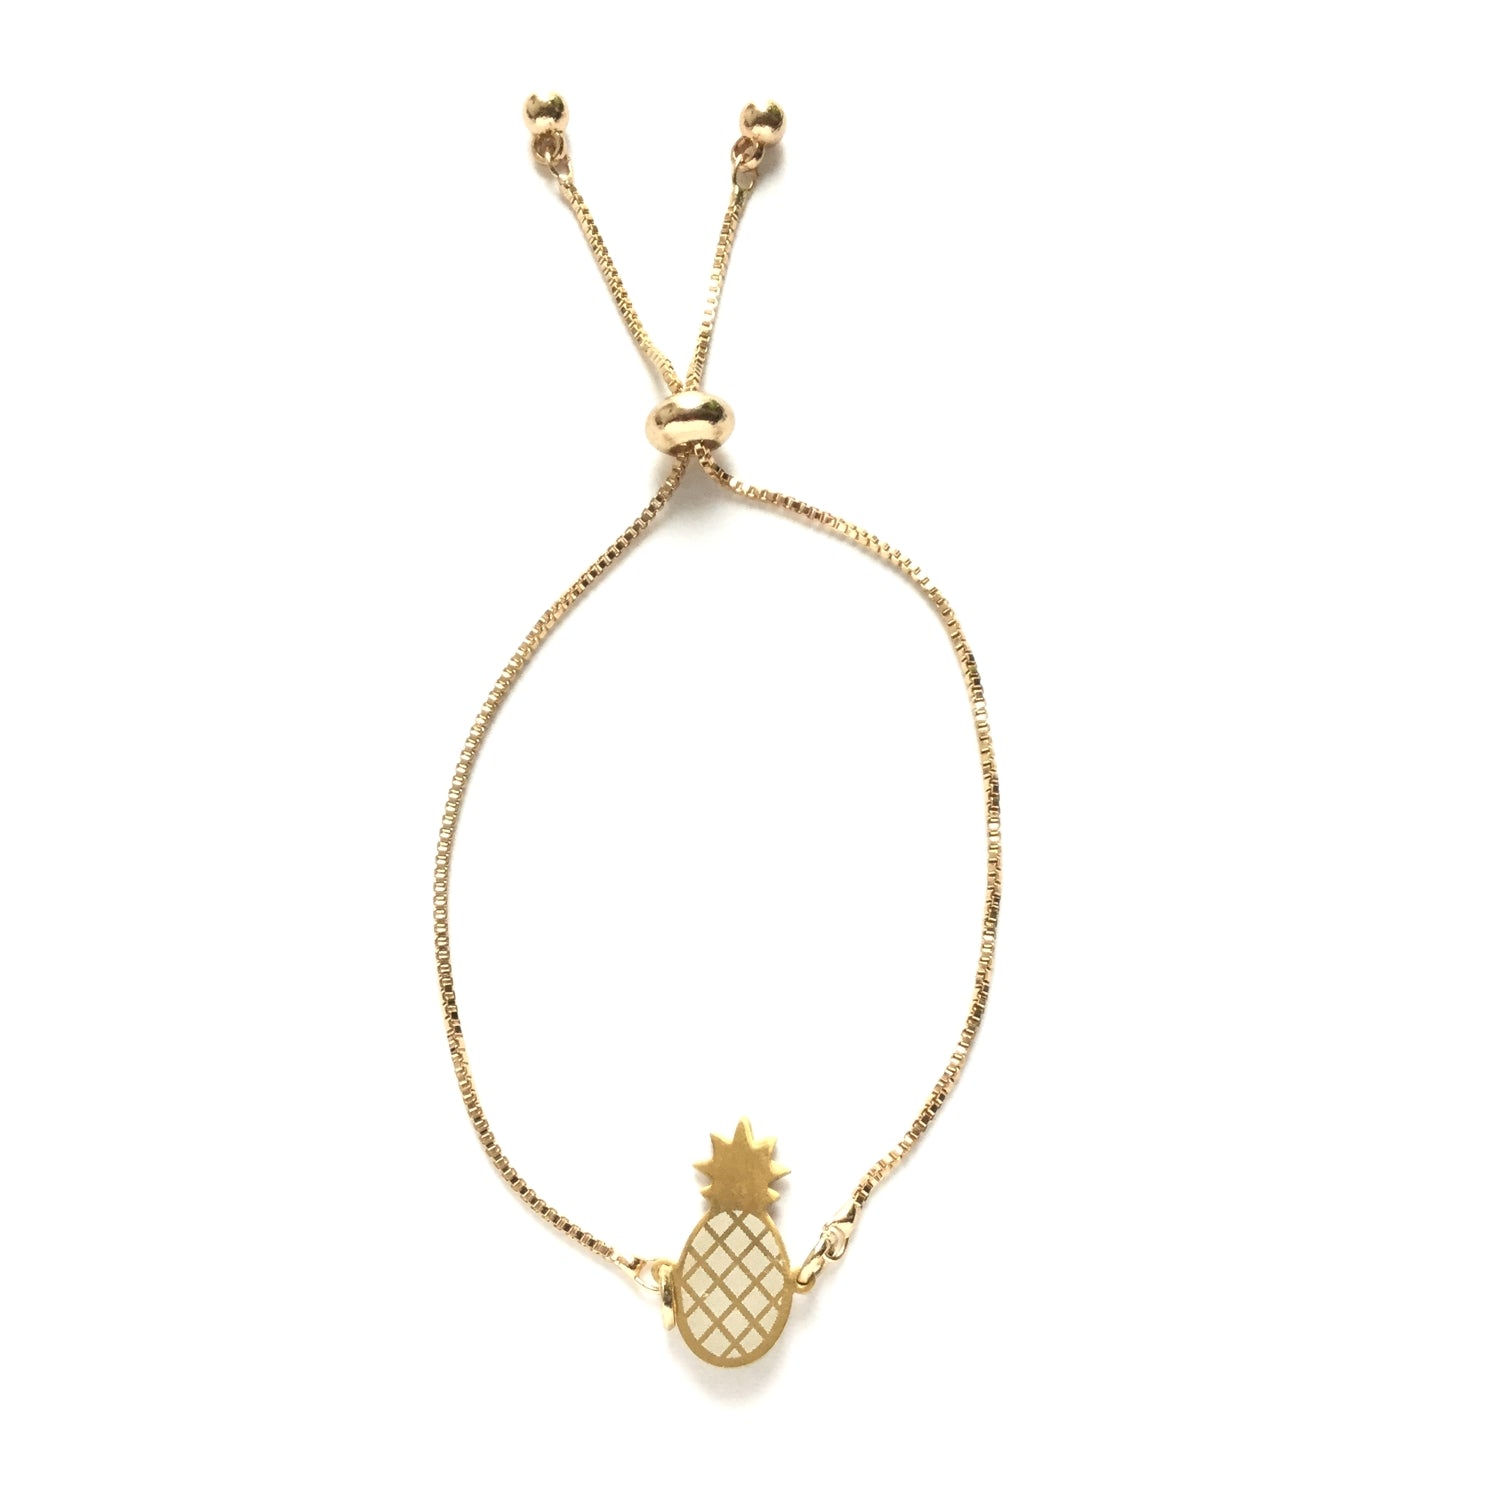 Gold stainless steel pineapple gold stainless steel box chain adjustable bracelet